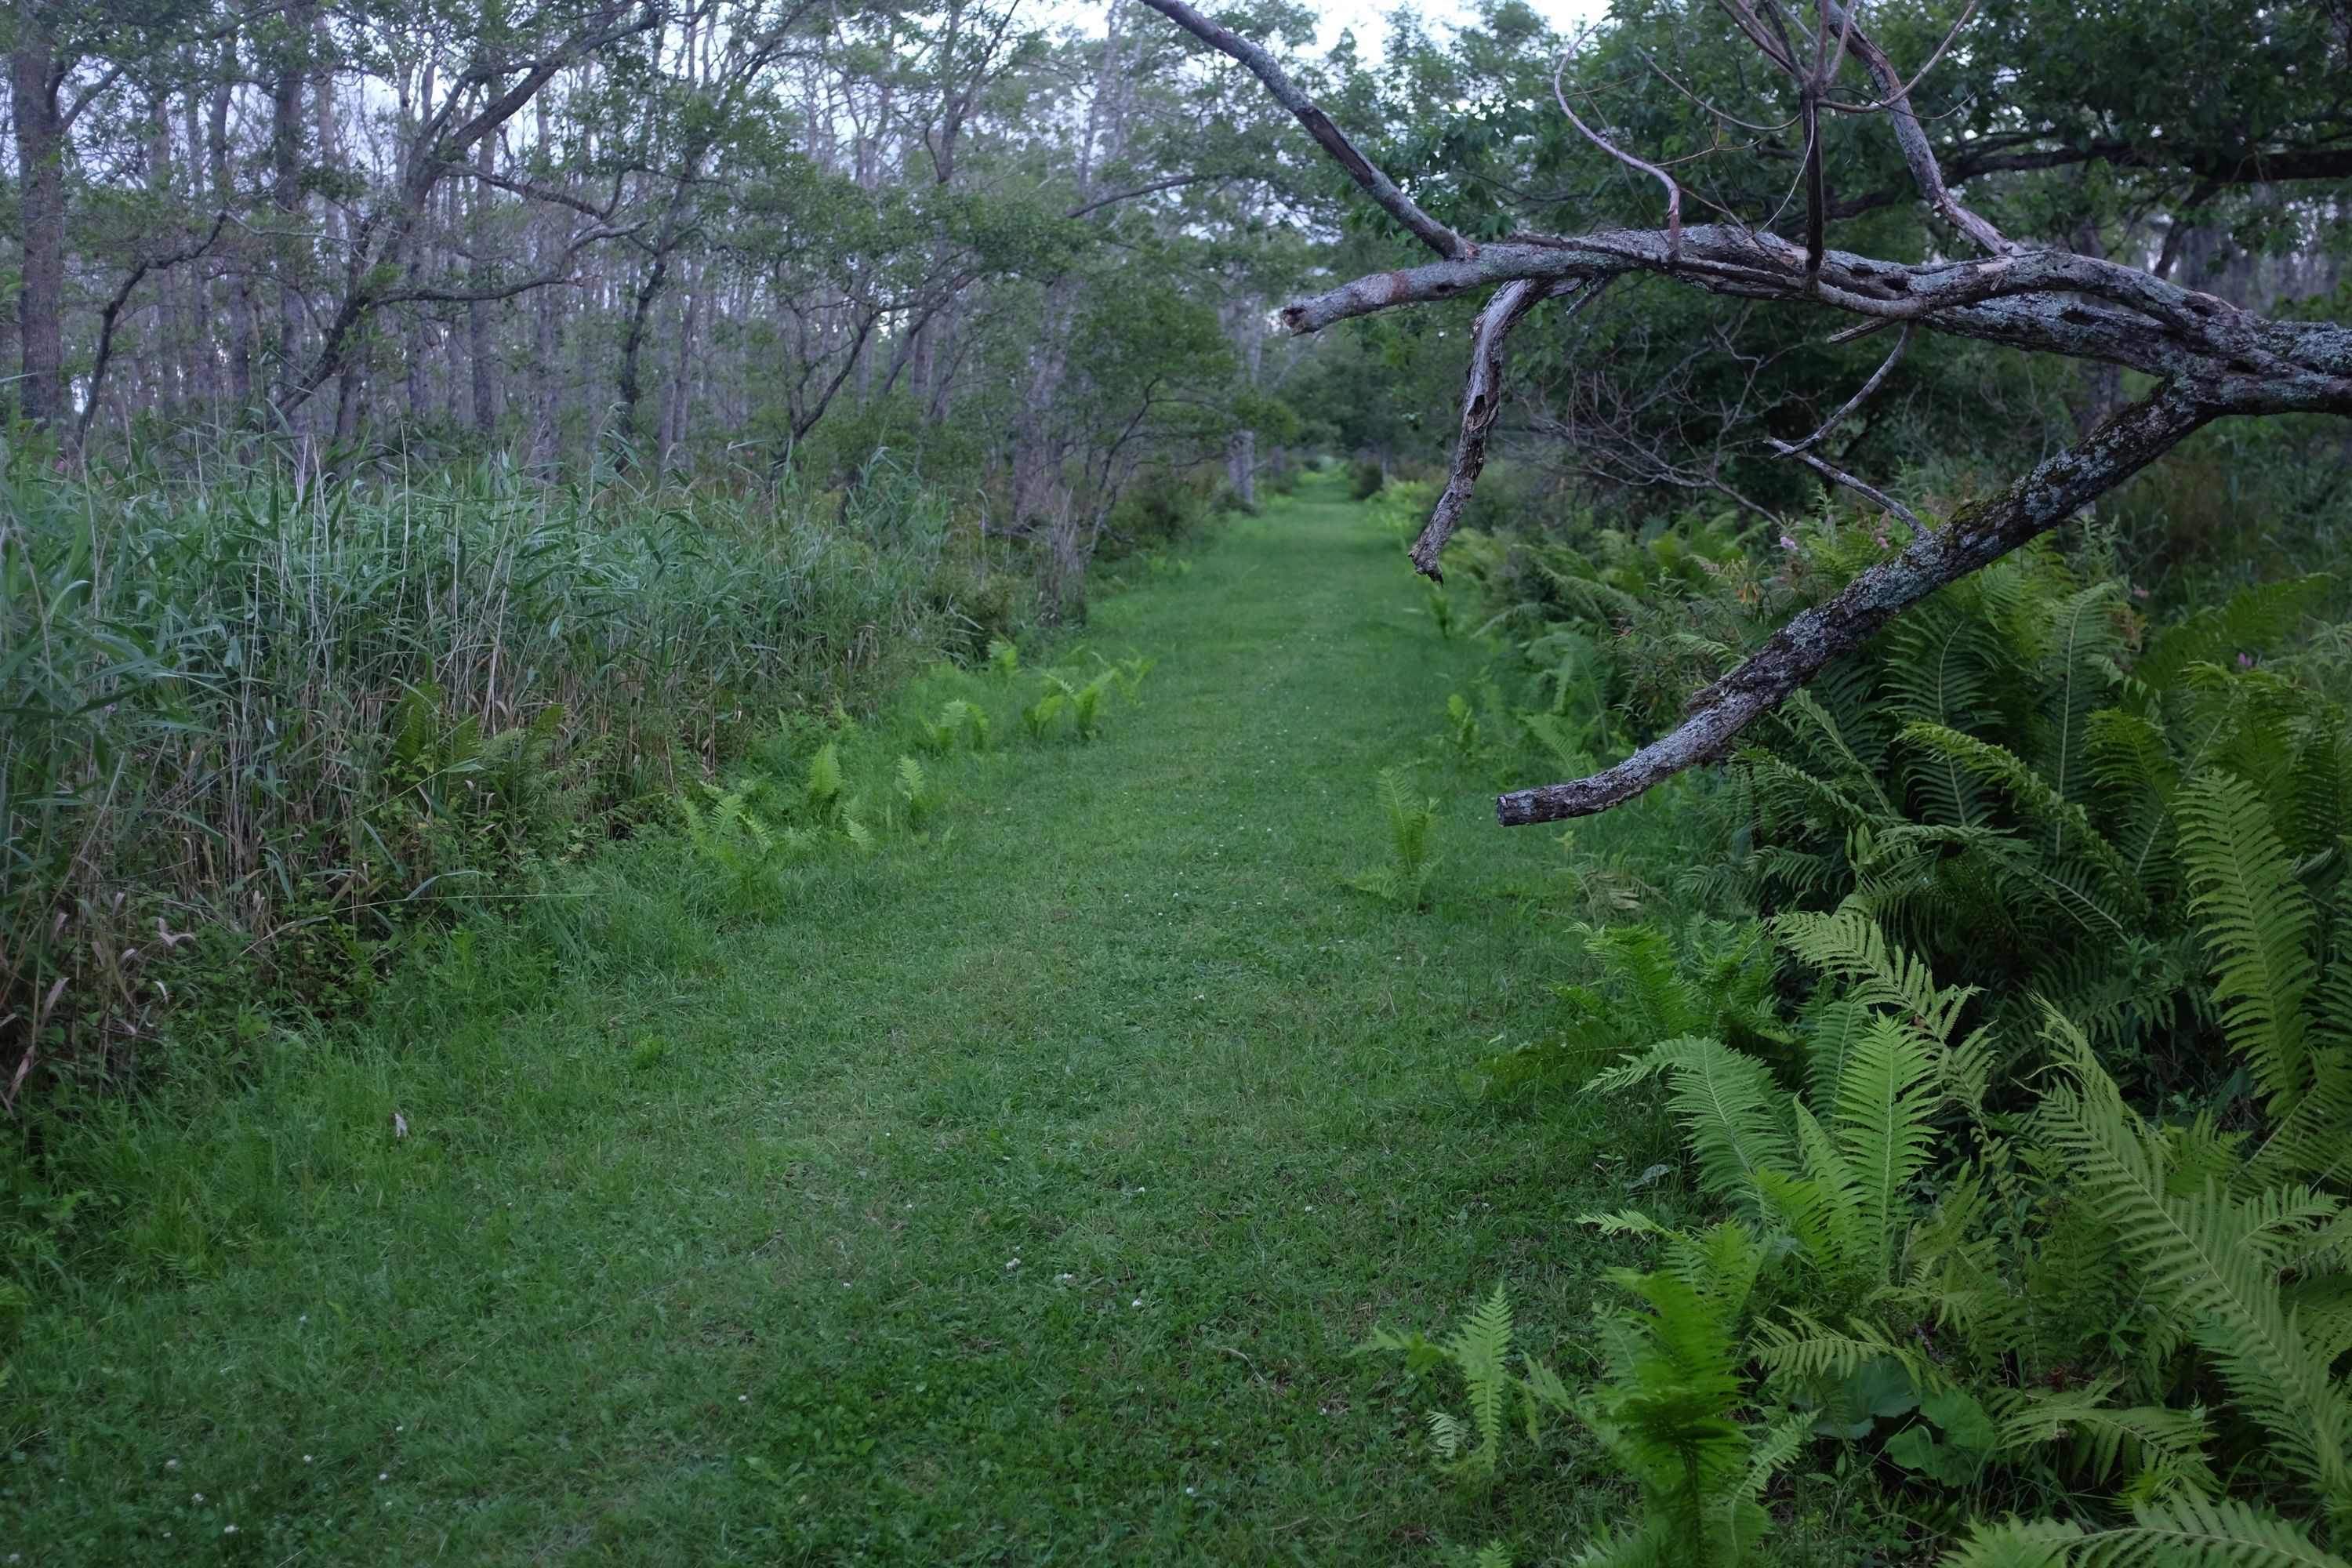 A straight, grassy trail leads through a thin forest.